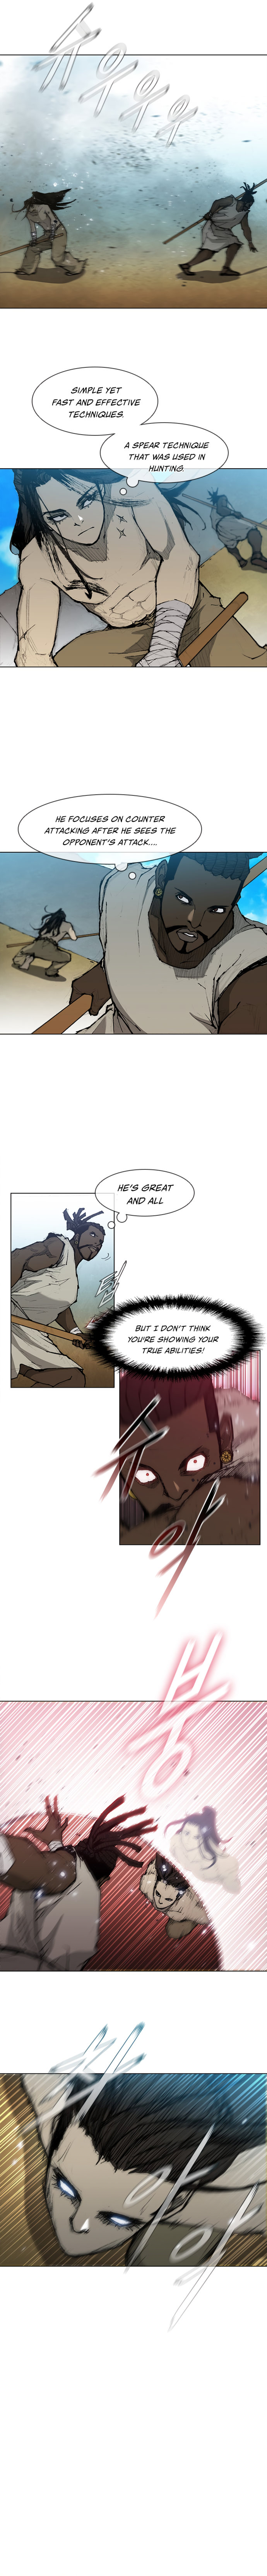 Long Way of the Warrior - Chapter 31 Page 6